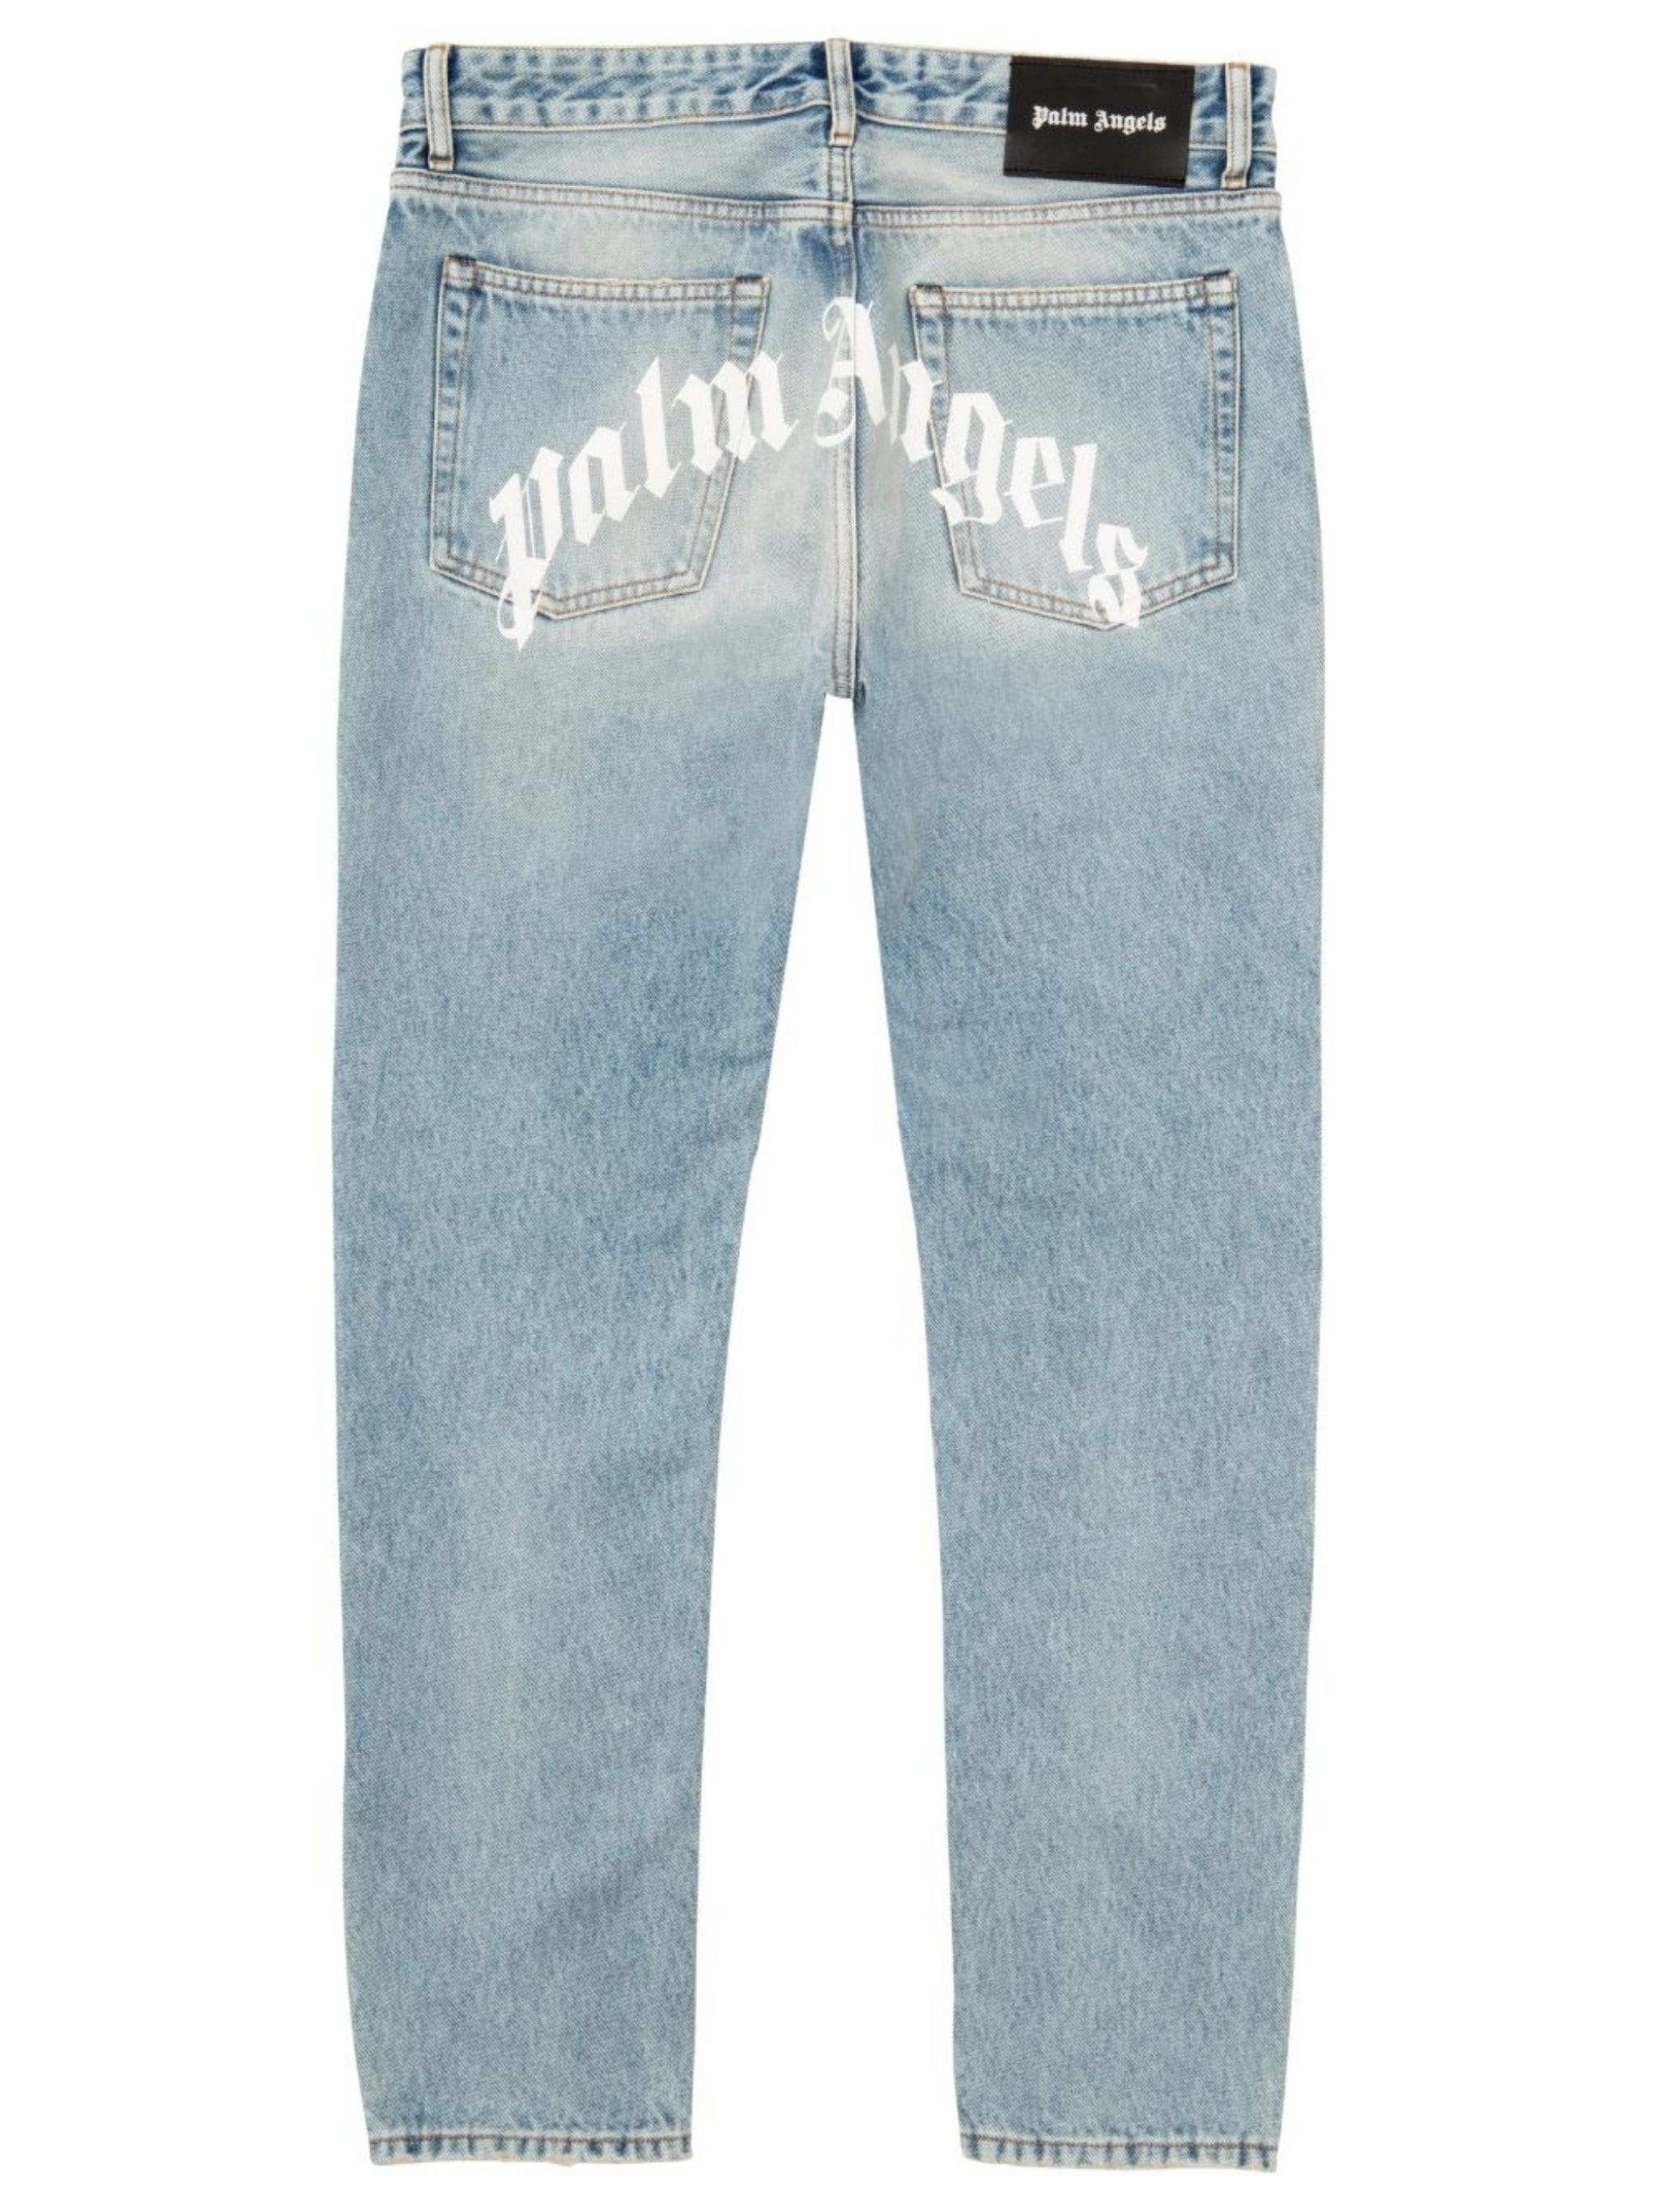 curved-logo print jeans - 7